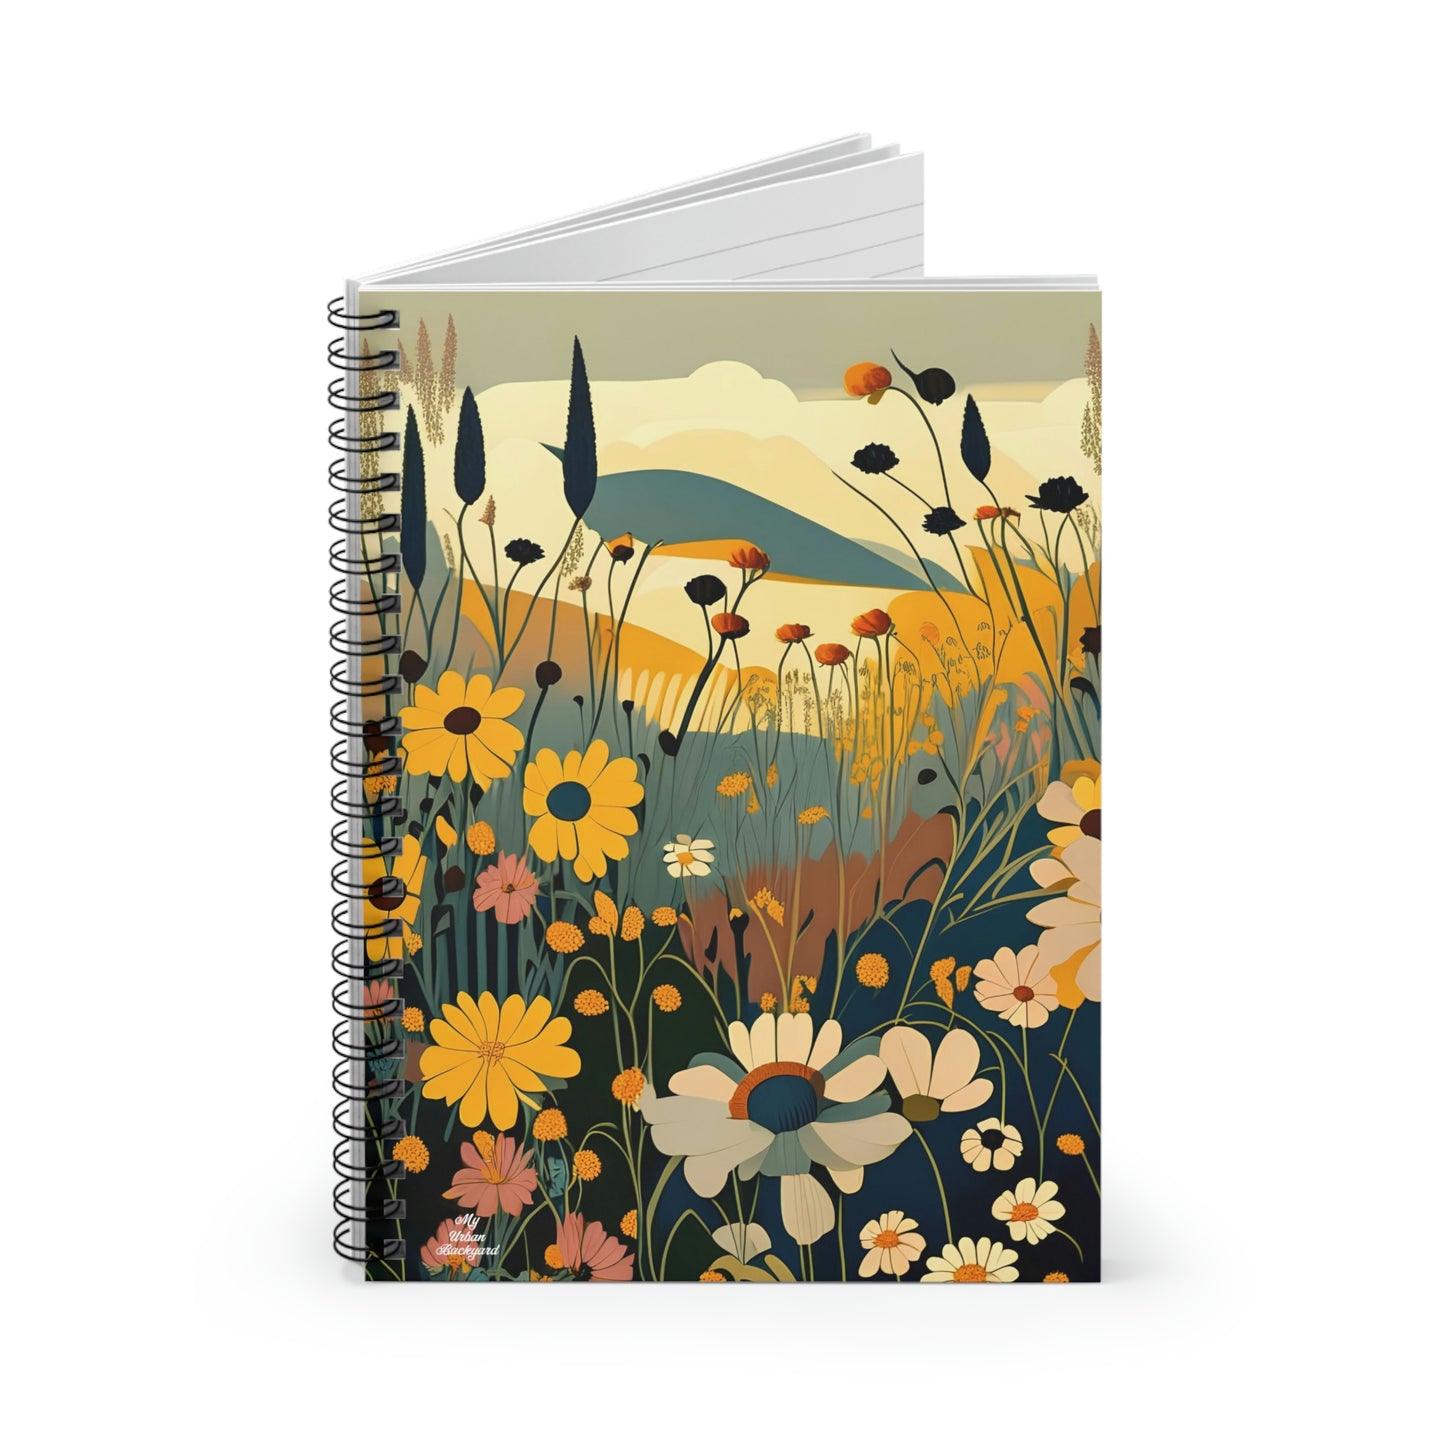 Spiral Notebook Writing Journal with 118 ruled line pages - Mountainside Wildflowers